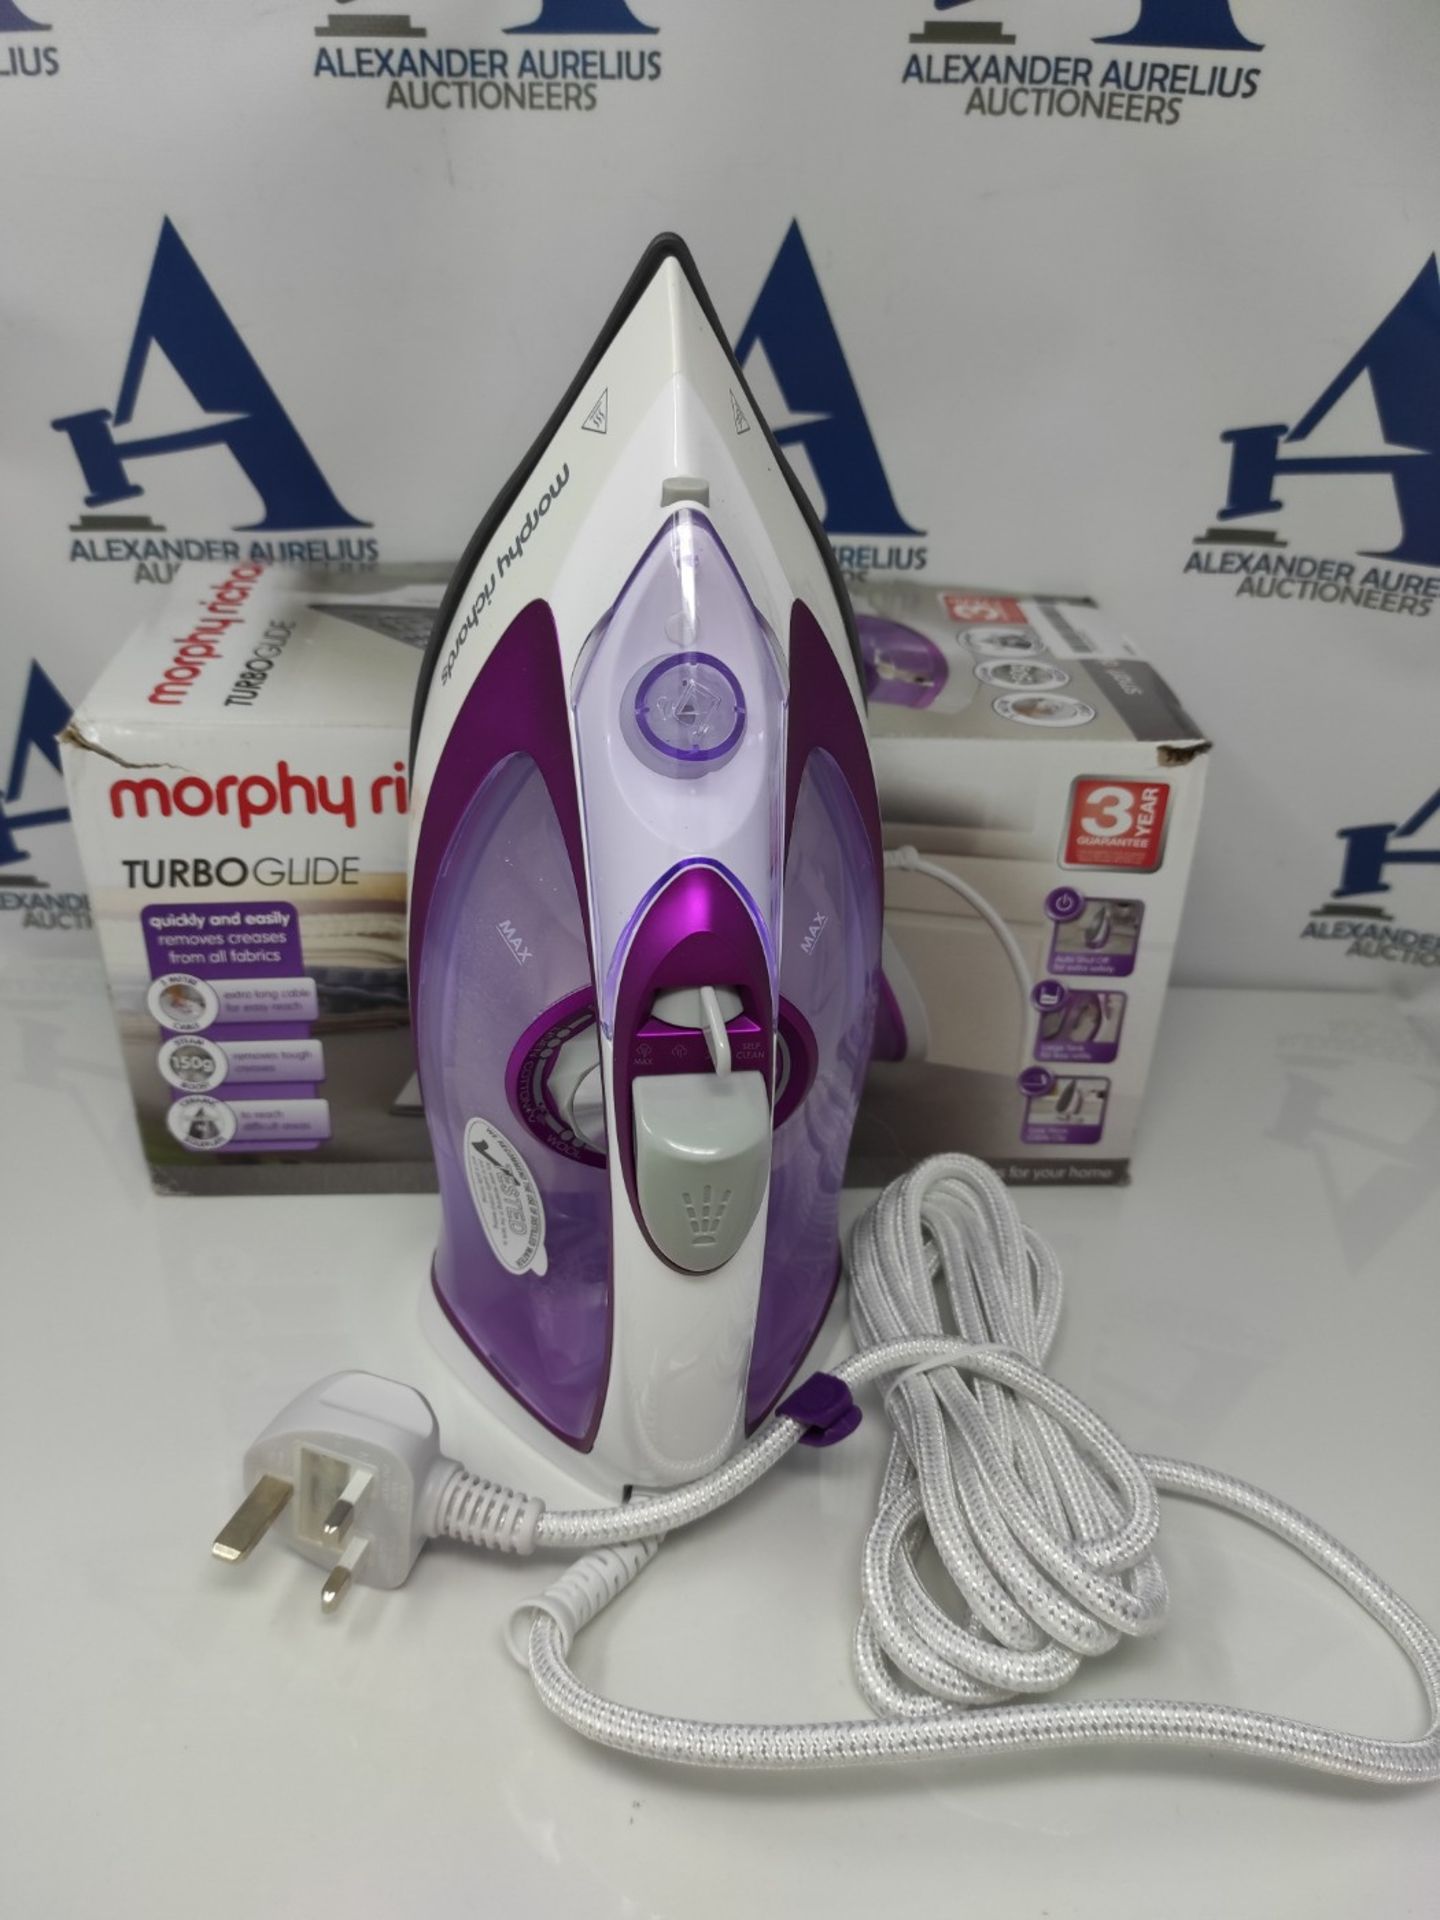 Morphy Richards 302000 Turbo Glide Steam Iron, 3 m Cable, 150 g Steam Shot, Auto Shut - Image 3 of 3